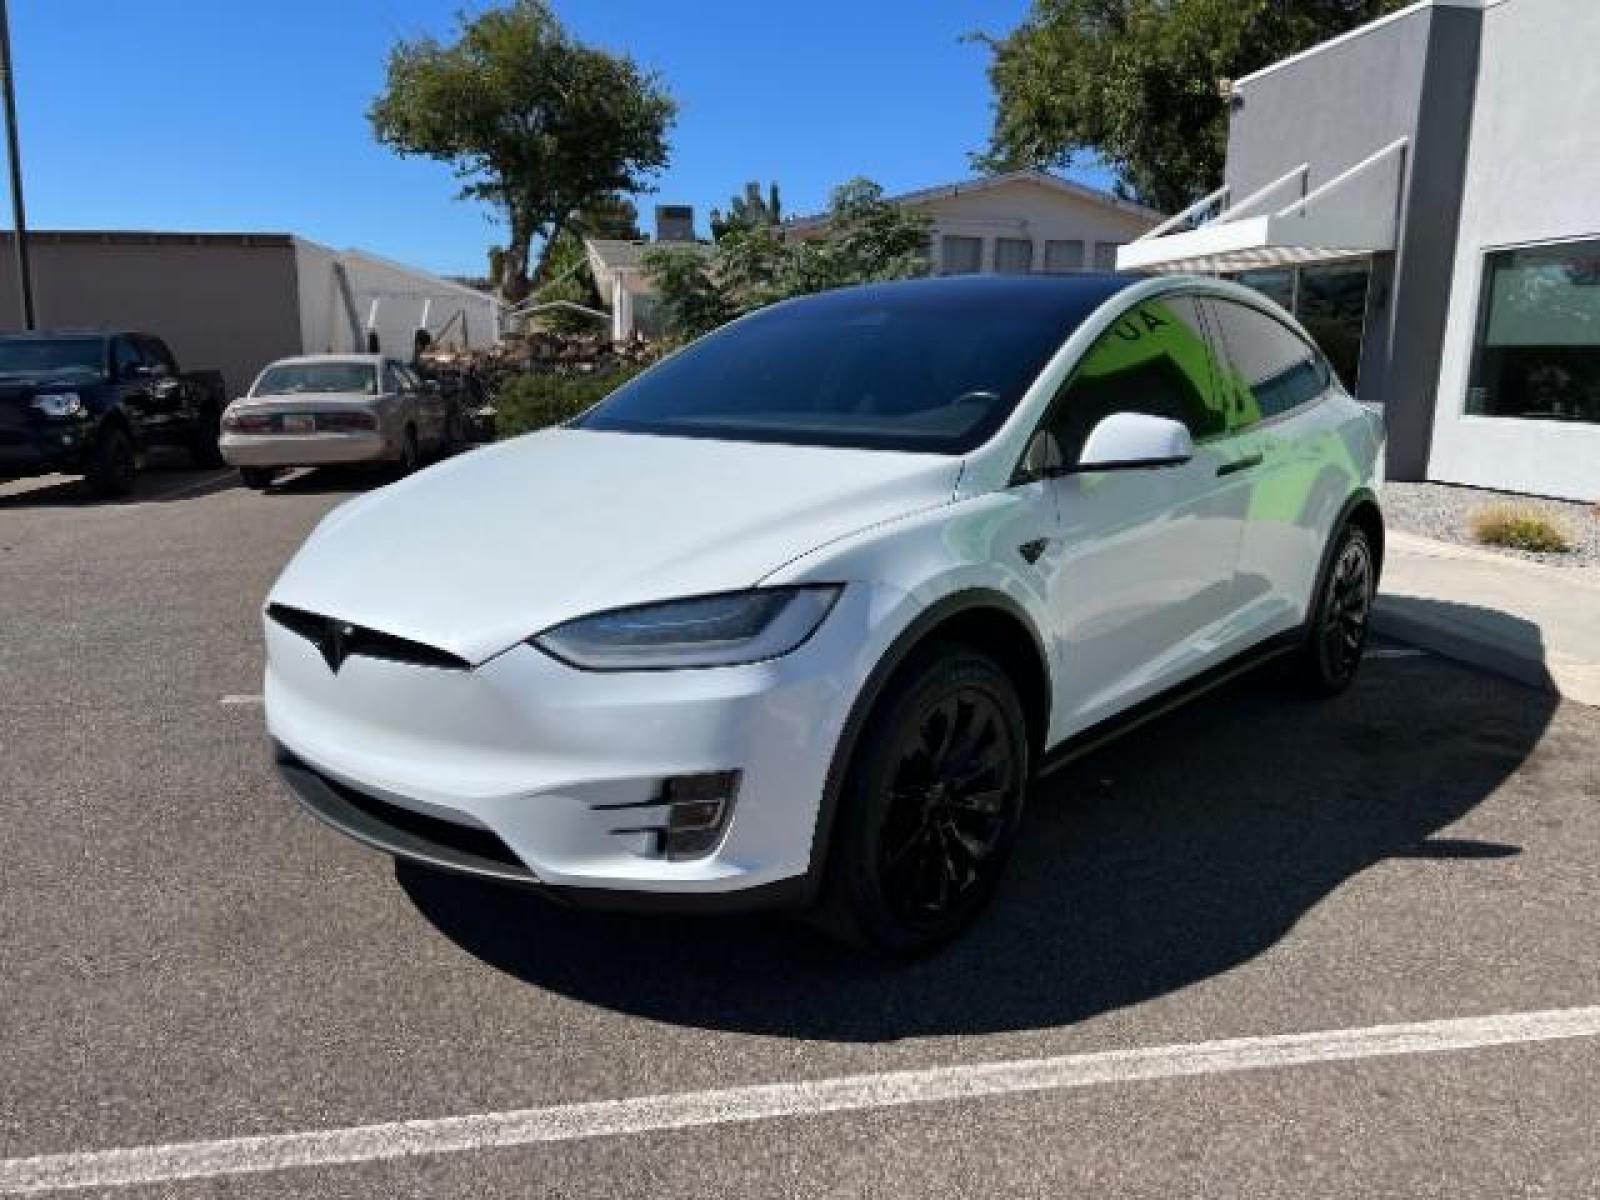 2019 Pearl White Multi-Coat /All Black, leatherette Tesla Model X Standard Range (5YJXCAE21KF) with an ELECTRIC engine, 1-Speed Automatic transmission, located at 1865 East Red Hills Pkwy, St. George, 84770, (435) 628-0023, 37.120850, -113.543640 - AWD, 7 Seats, Autopilot, Raven, Cold weather package, Adaptive suspension, Tow hitch, 2 remotes, FSD computer 3.0 upgrade. Gets 270 miles on a full charge. Black chrome delete vinyl (removeable). This is a beautiful 1 owner MX for way less money and less waiting compared to ordering from Tesla. Bump - Photo #4